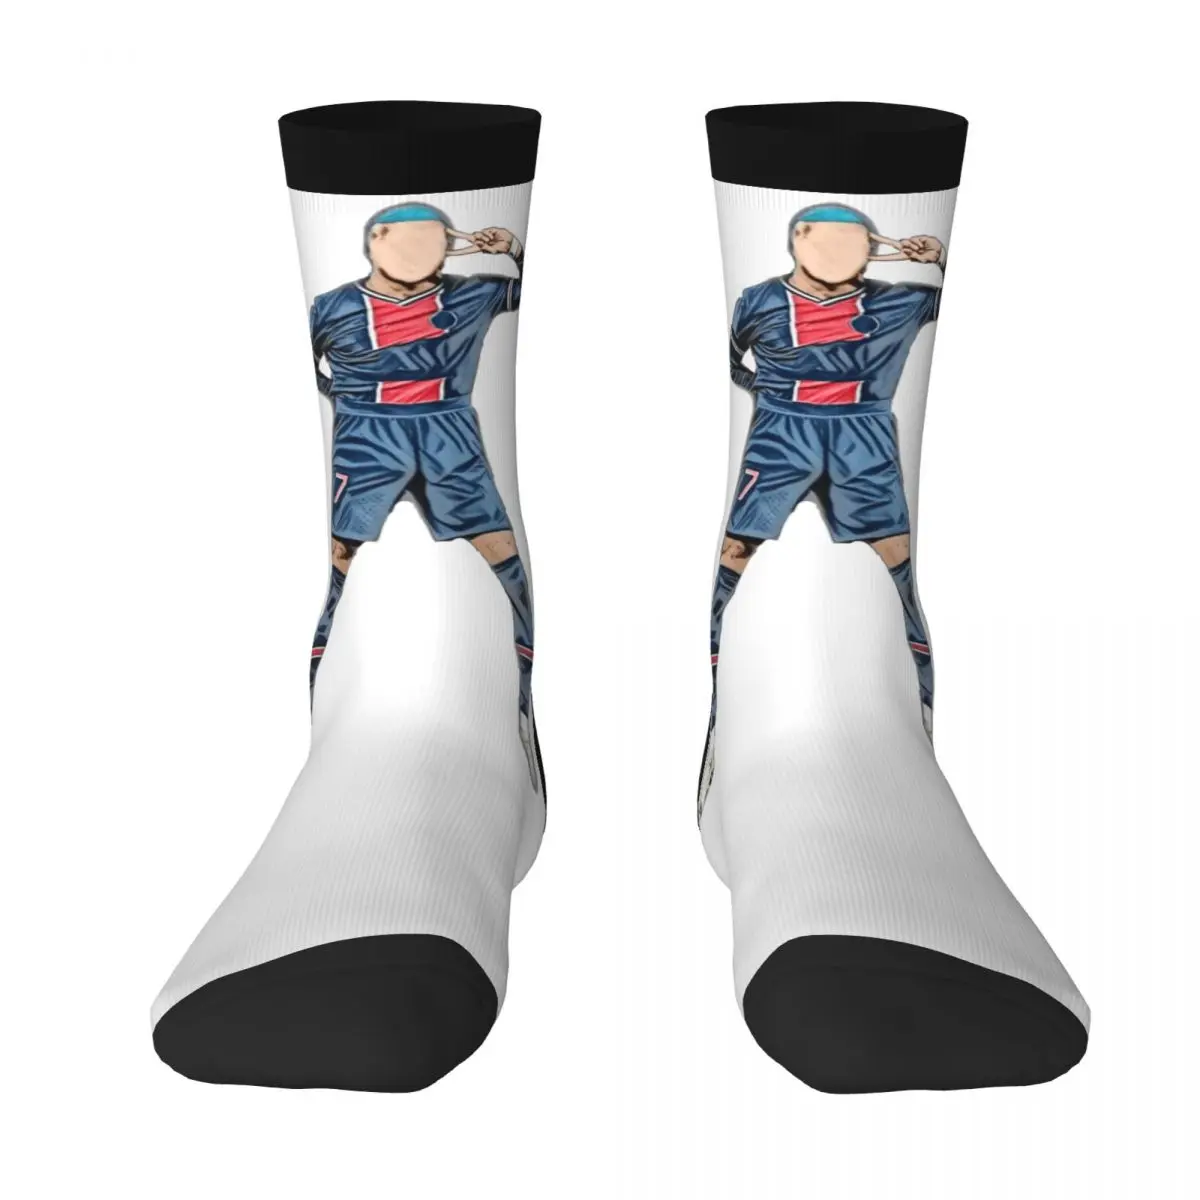 

Graphic France Kylianer And Mbappﾩ And Mbappe (11) Football Team Stocking The Best Buy Knapsack Compression SocksHumor Graphic